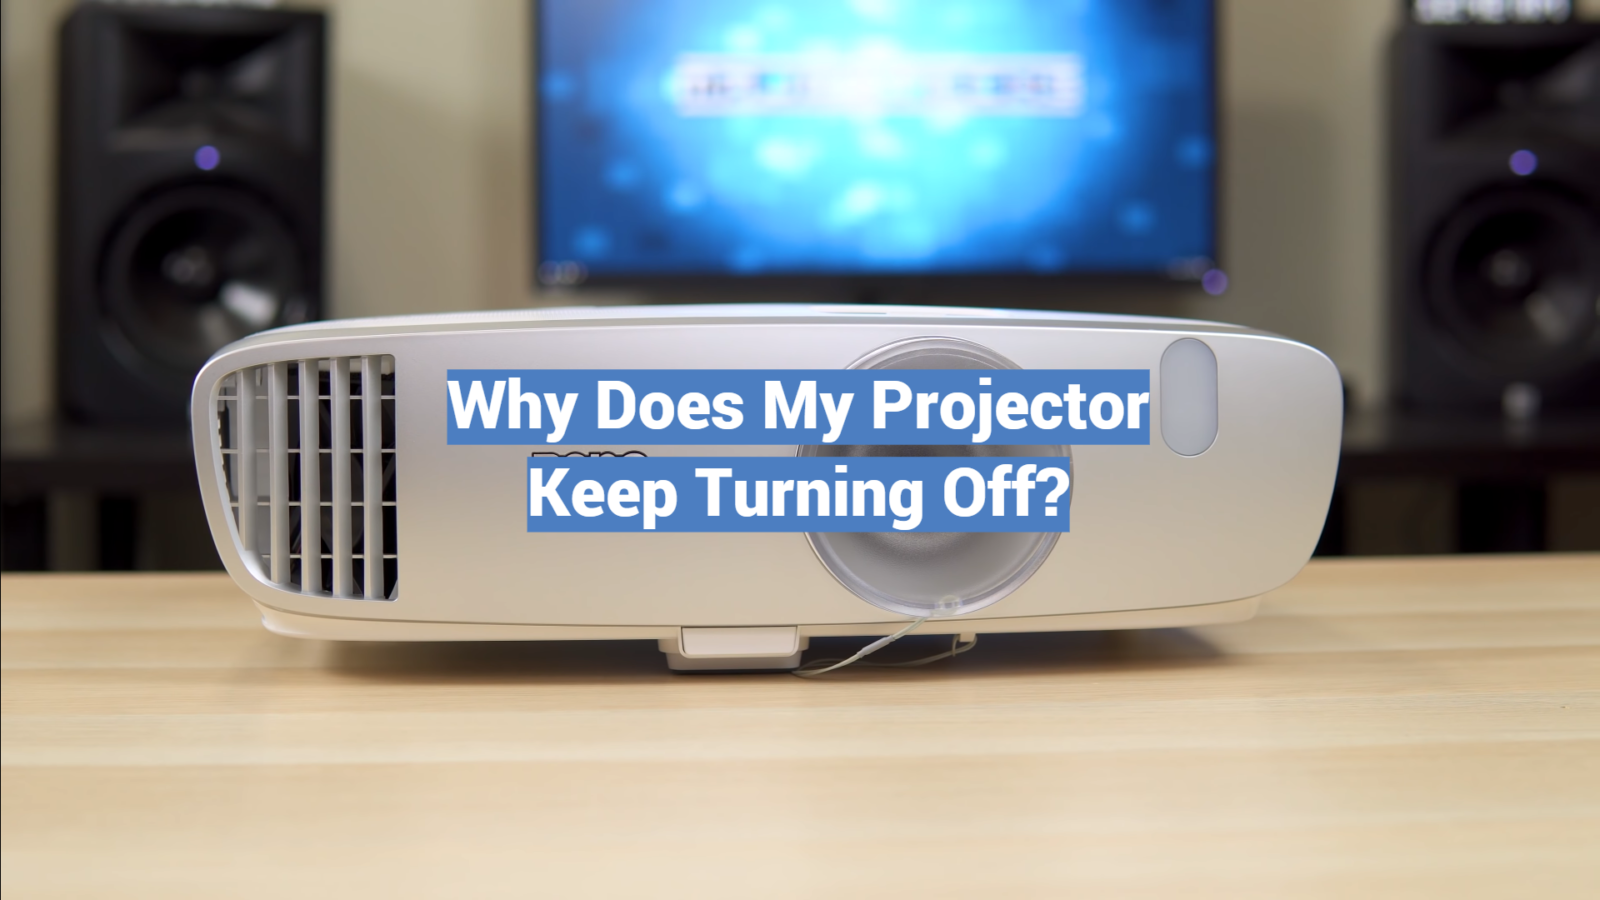 Why Does My Projector Keep Turning Off?